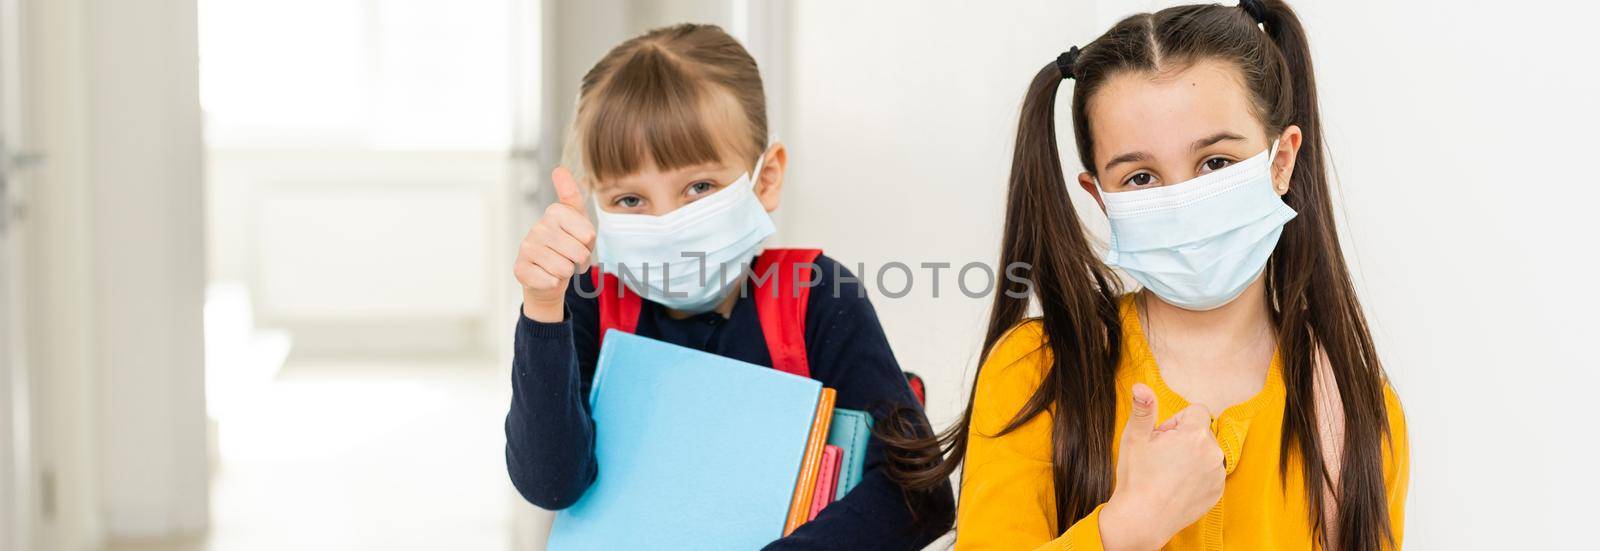 Cute little girls of primary hug each other with the mask on. School girls carry notebooks in hand and greet each other before entering school